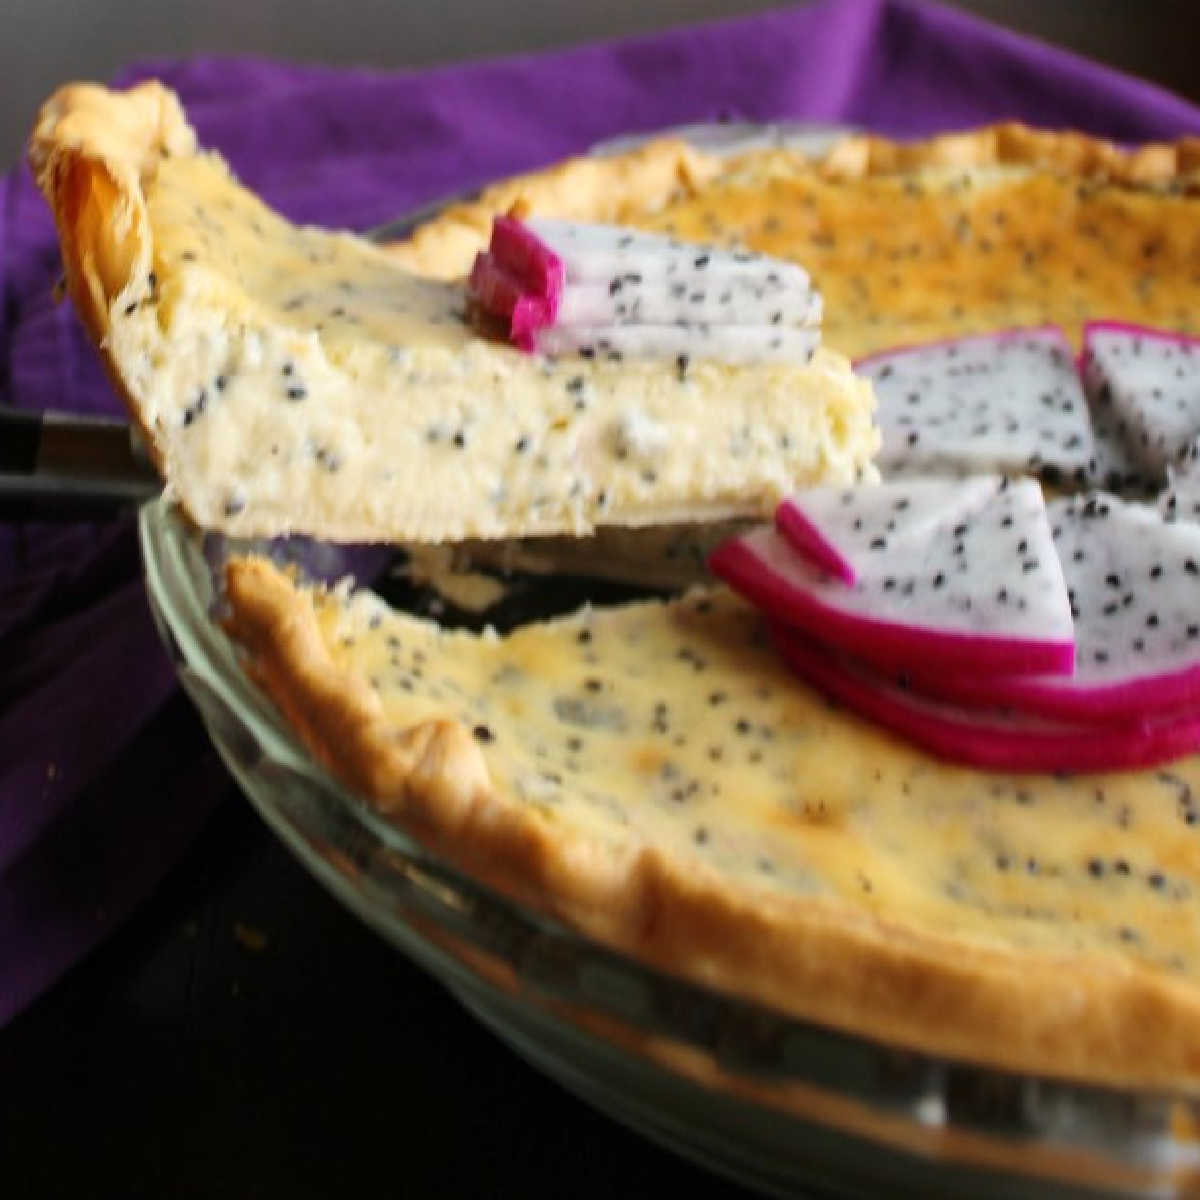 first slice of dragon fruit pie being lifted out of pie plate with creamy center dotted with black seeds showing.